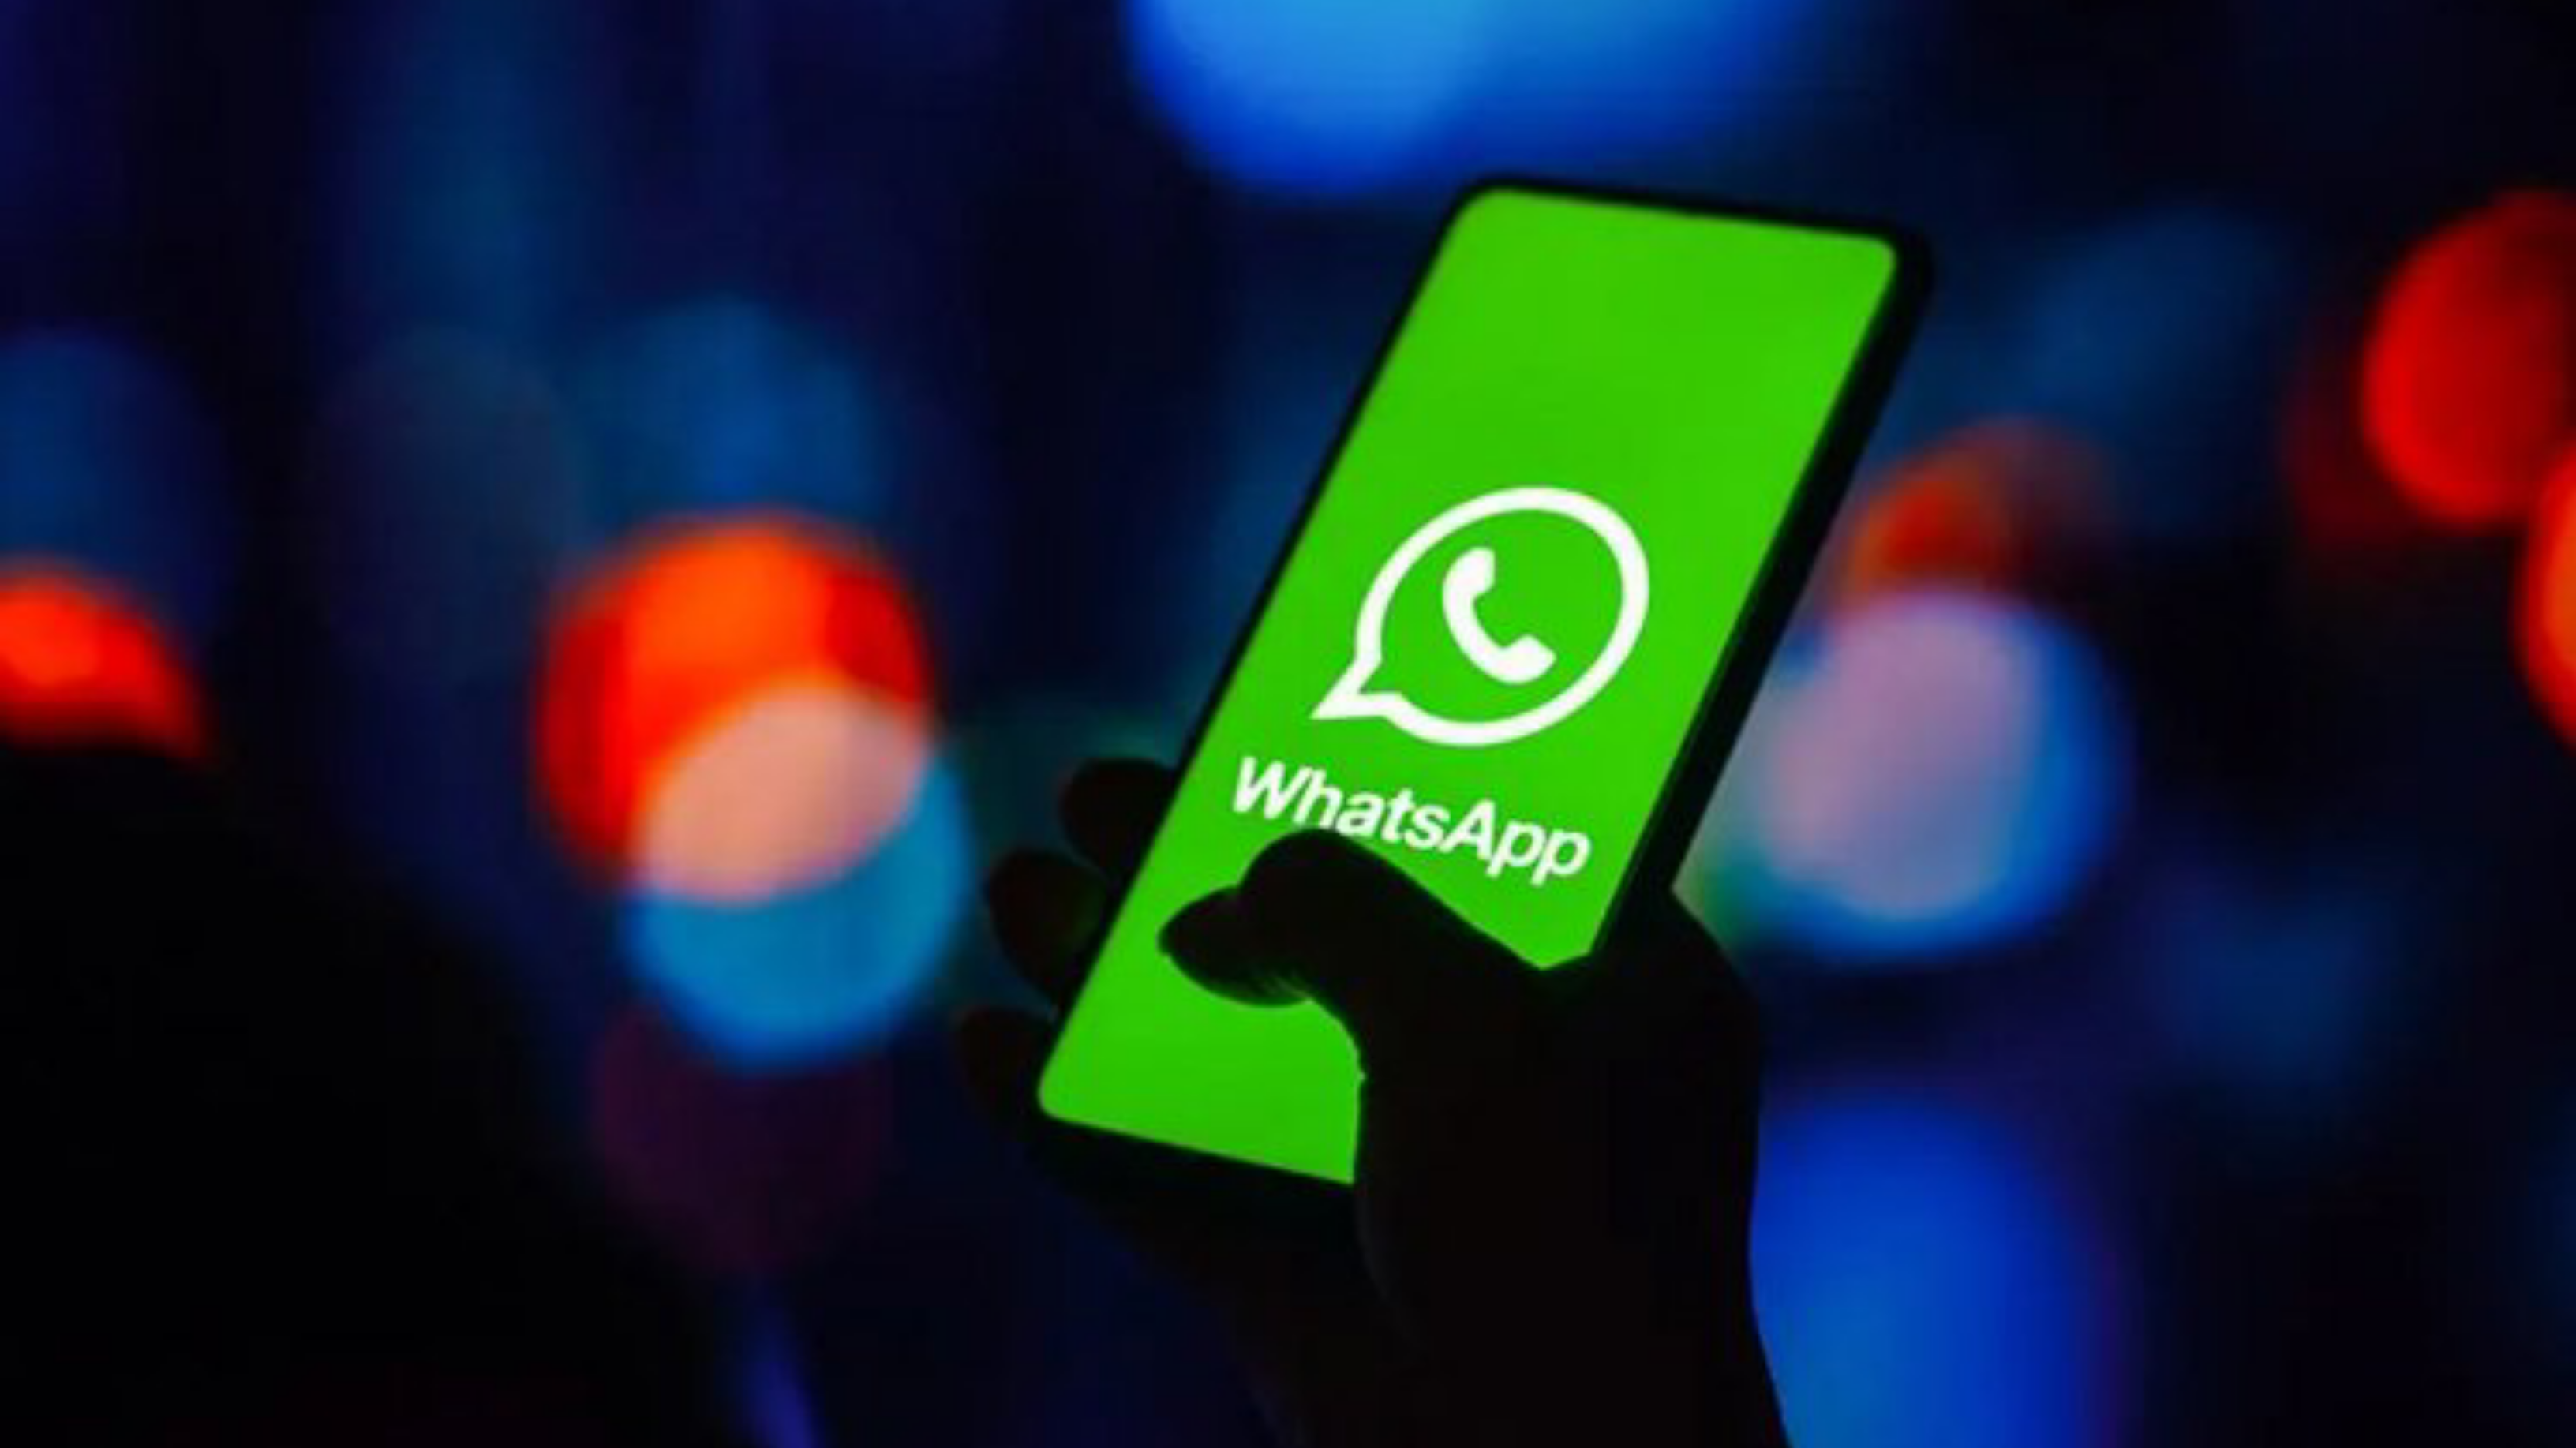 Now you can send messages to WhatsApp from any messaging app